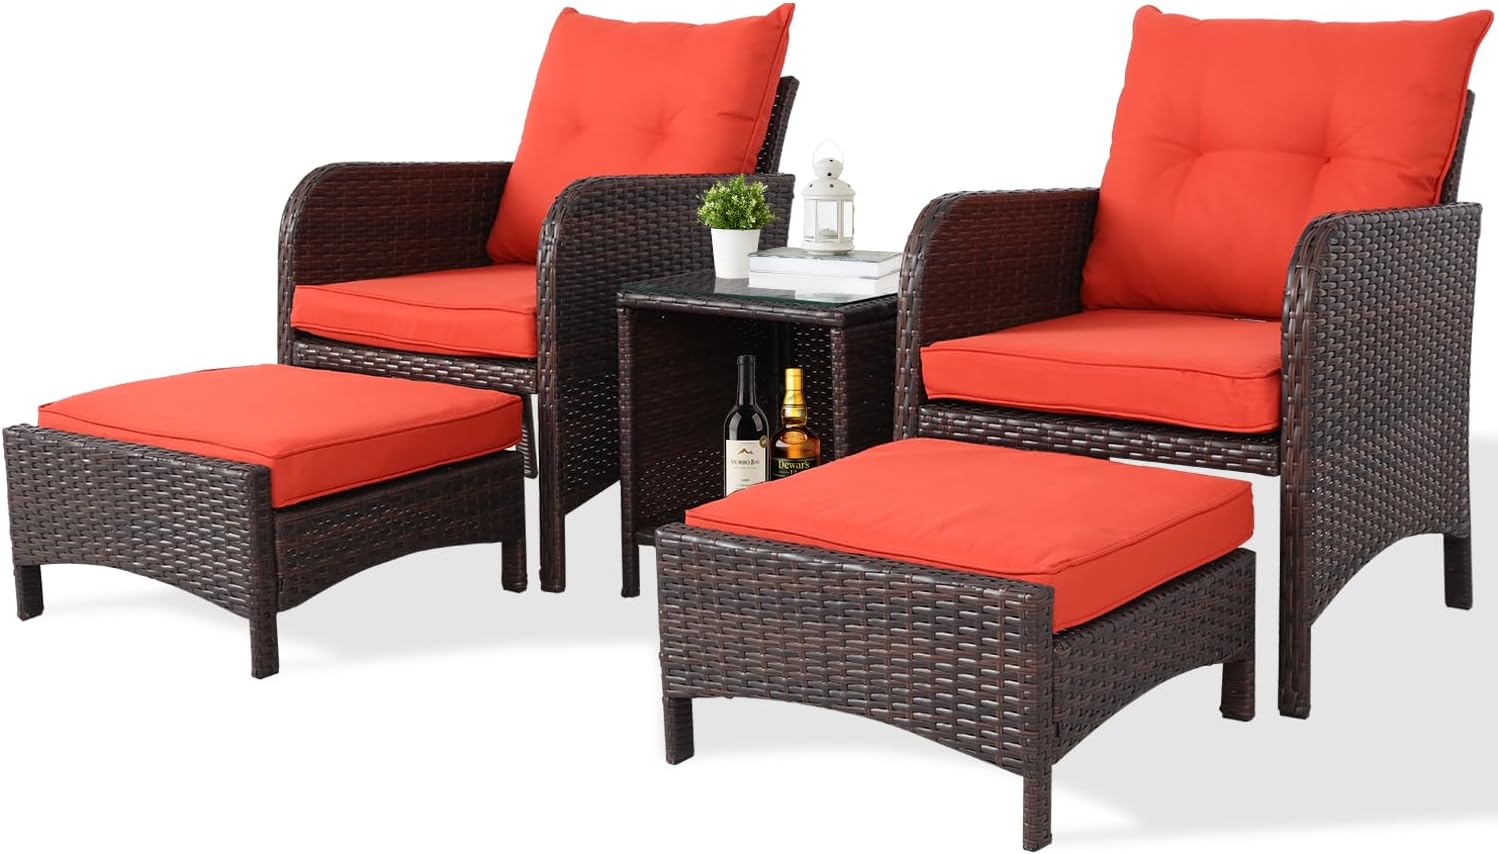 5 Piece Patio Conversation Set Balcony Furniture PE Wicker Rattan Outdoor Lounge Chairs with Cushions and 2 Ottoman Glass Table for Porch, Lawn (Mix Brown-Orange Red)